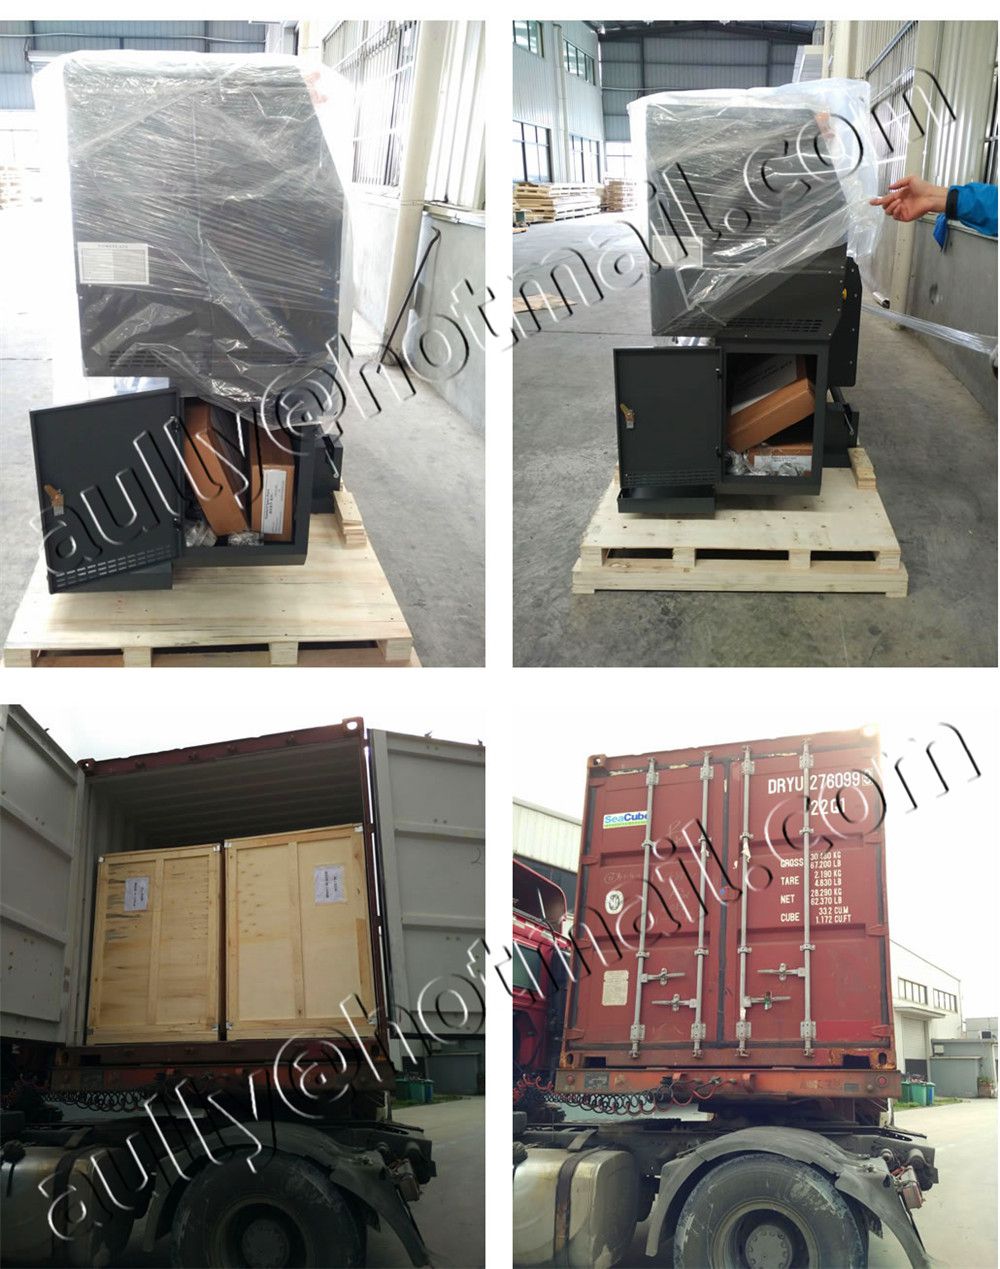 AS161014MX (2 Sets of SK512i Konica Printer with 8PCS KM512i/30pl heads) to Mexico